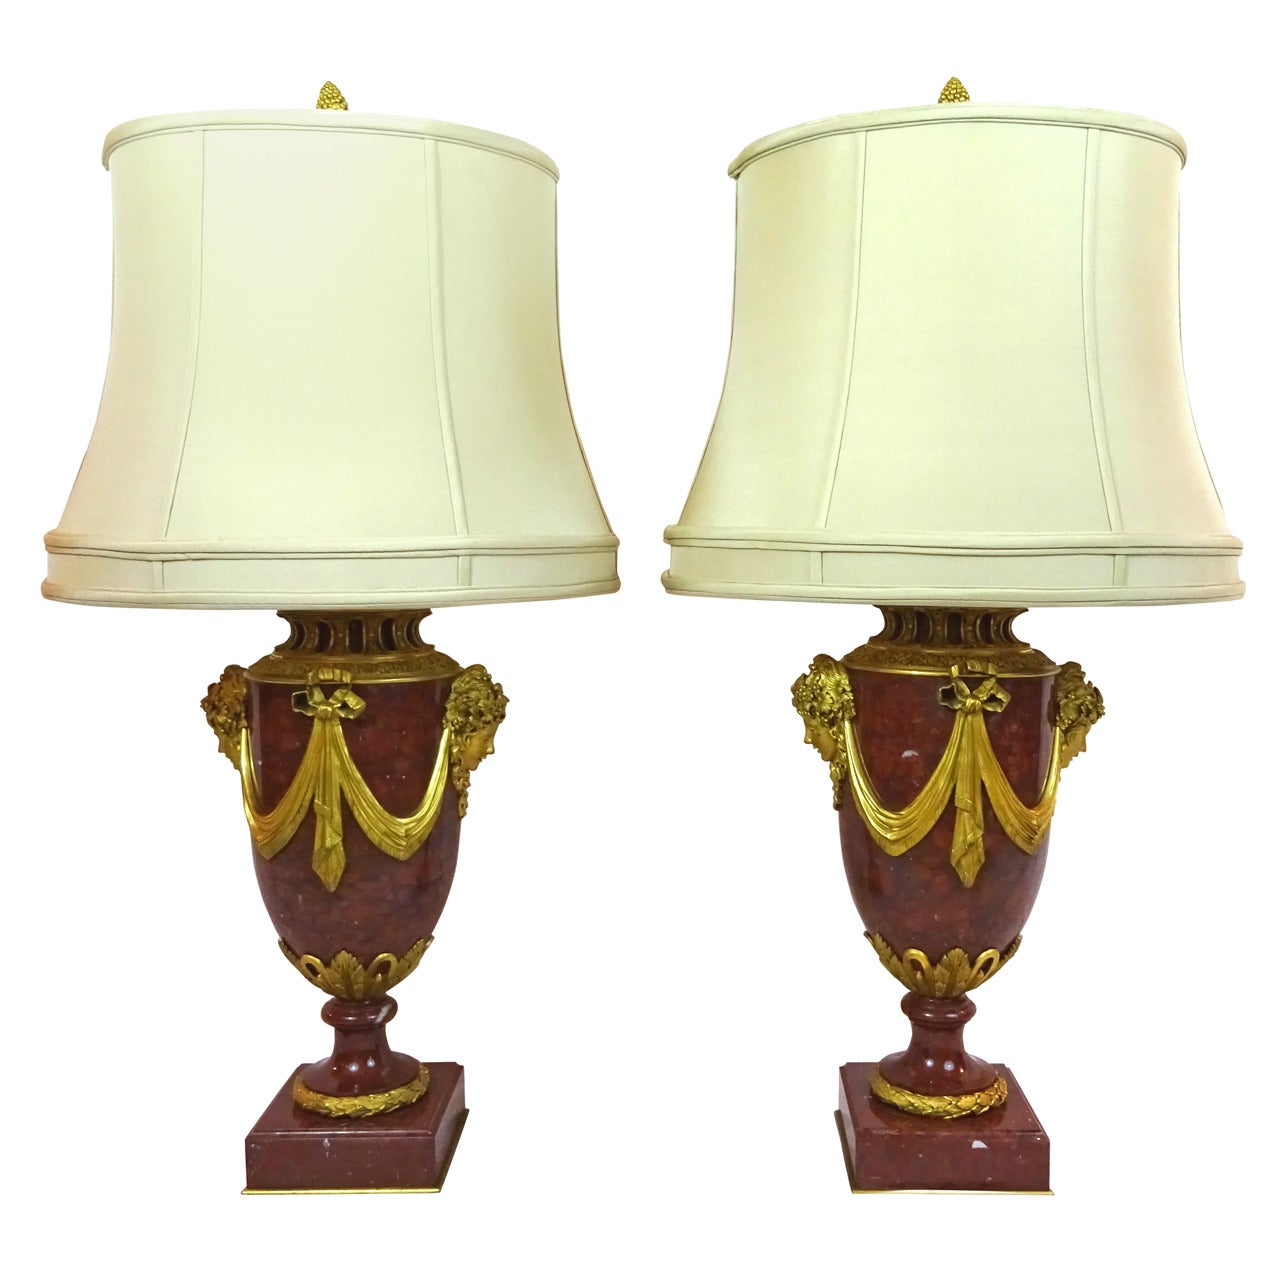 Pair of 19th Century French Marble and Ormolu Lamps For Sale